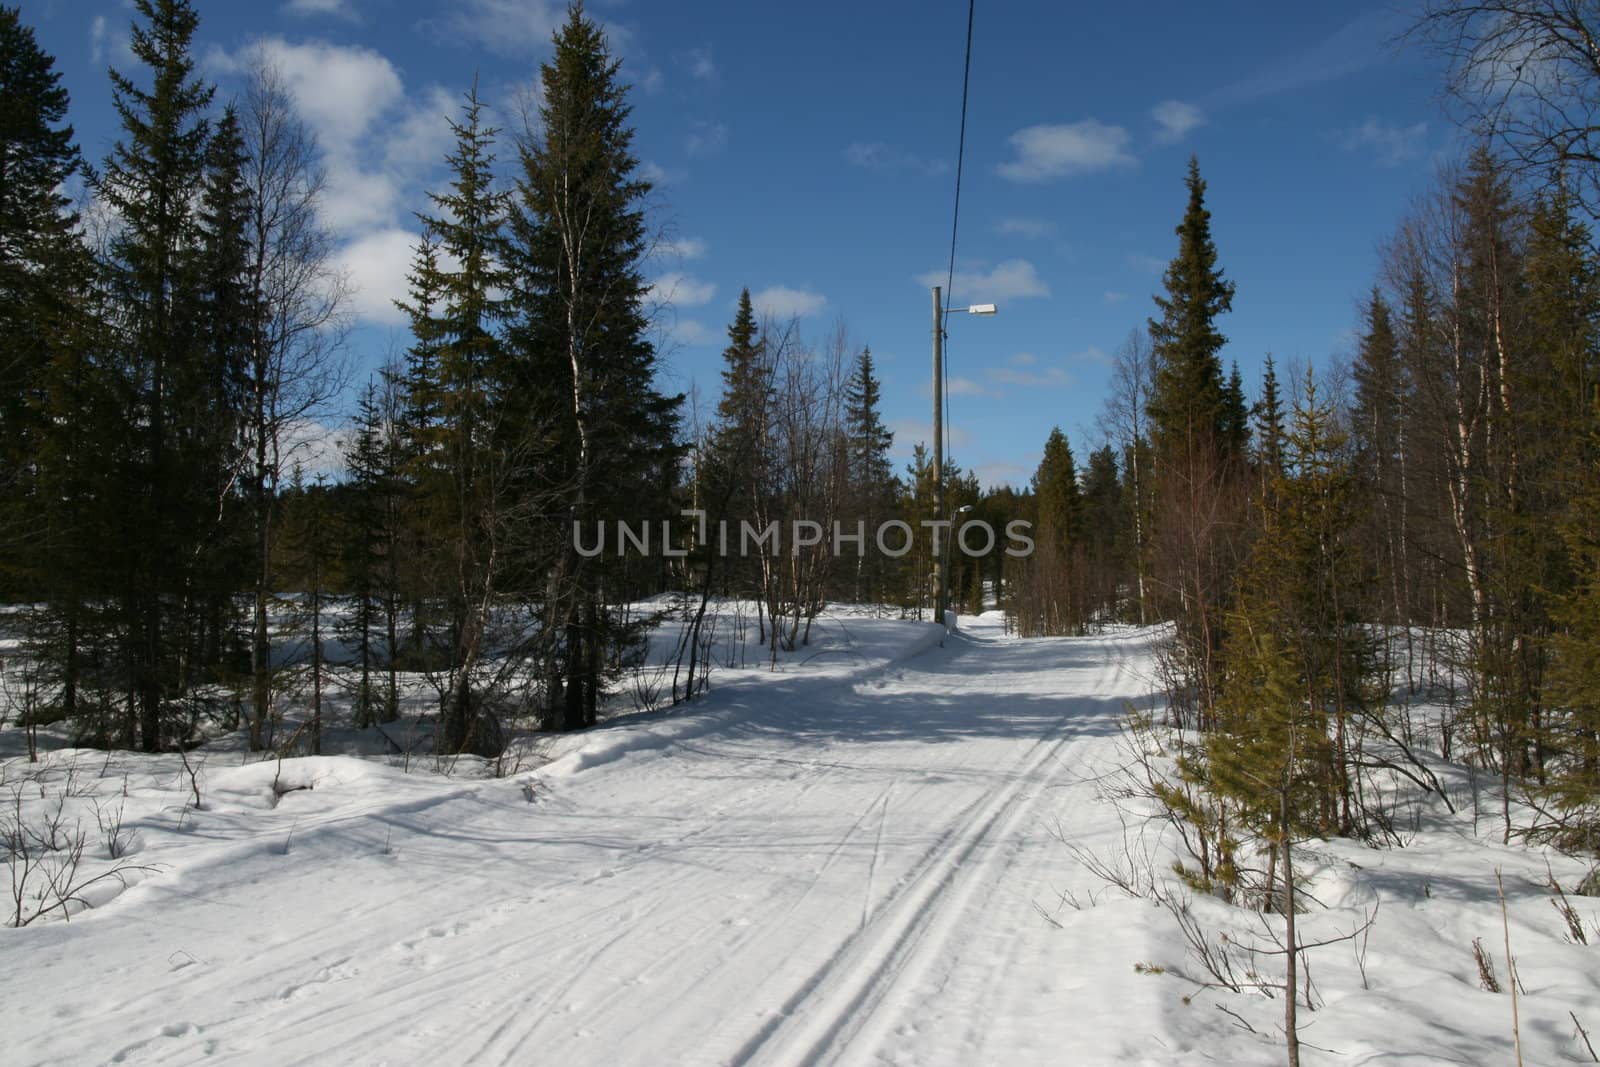 A skitrack in the forest, early spring.